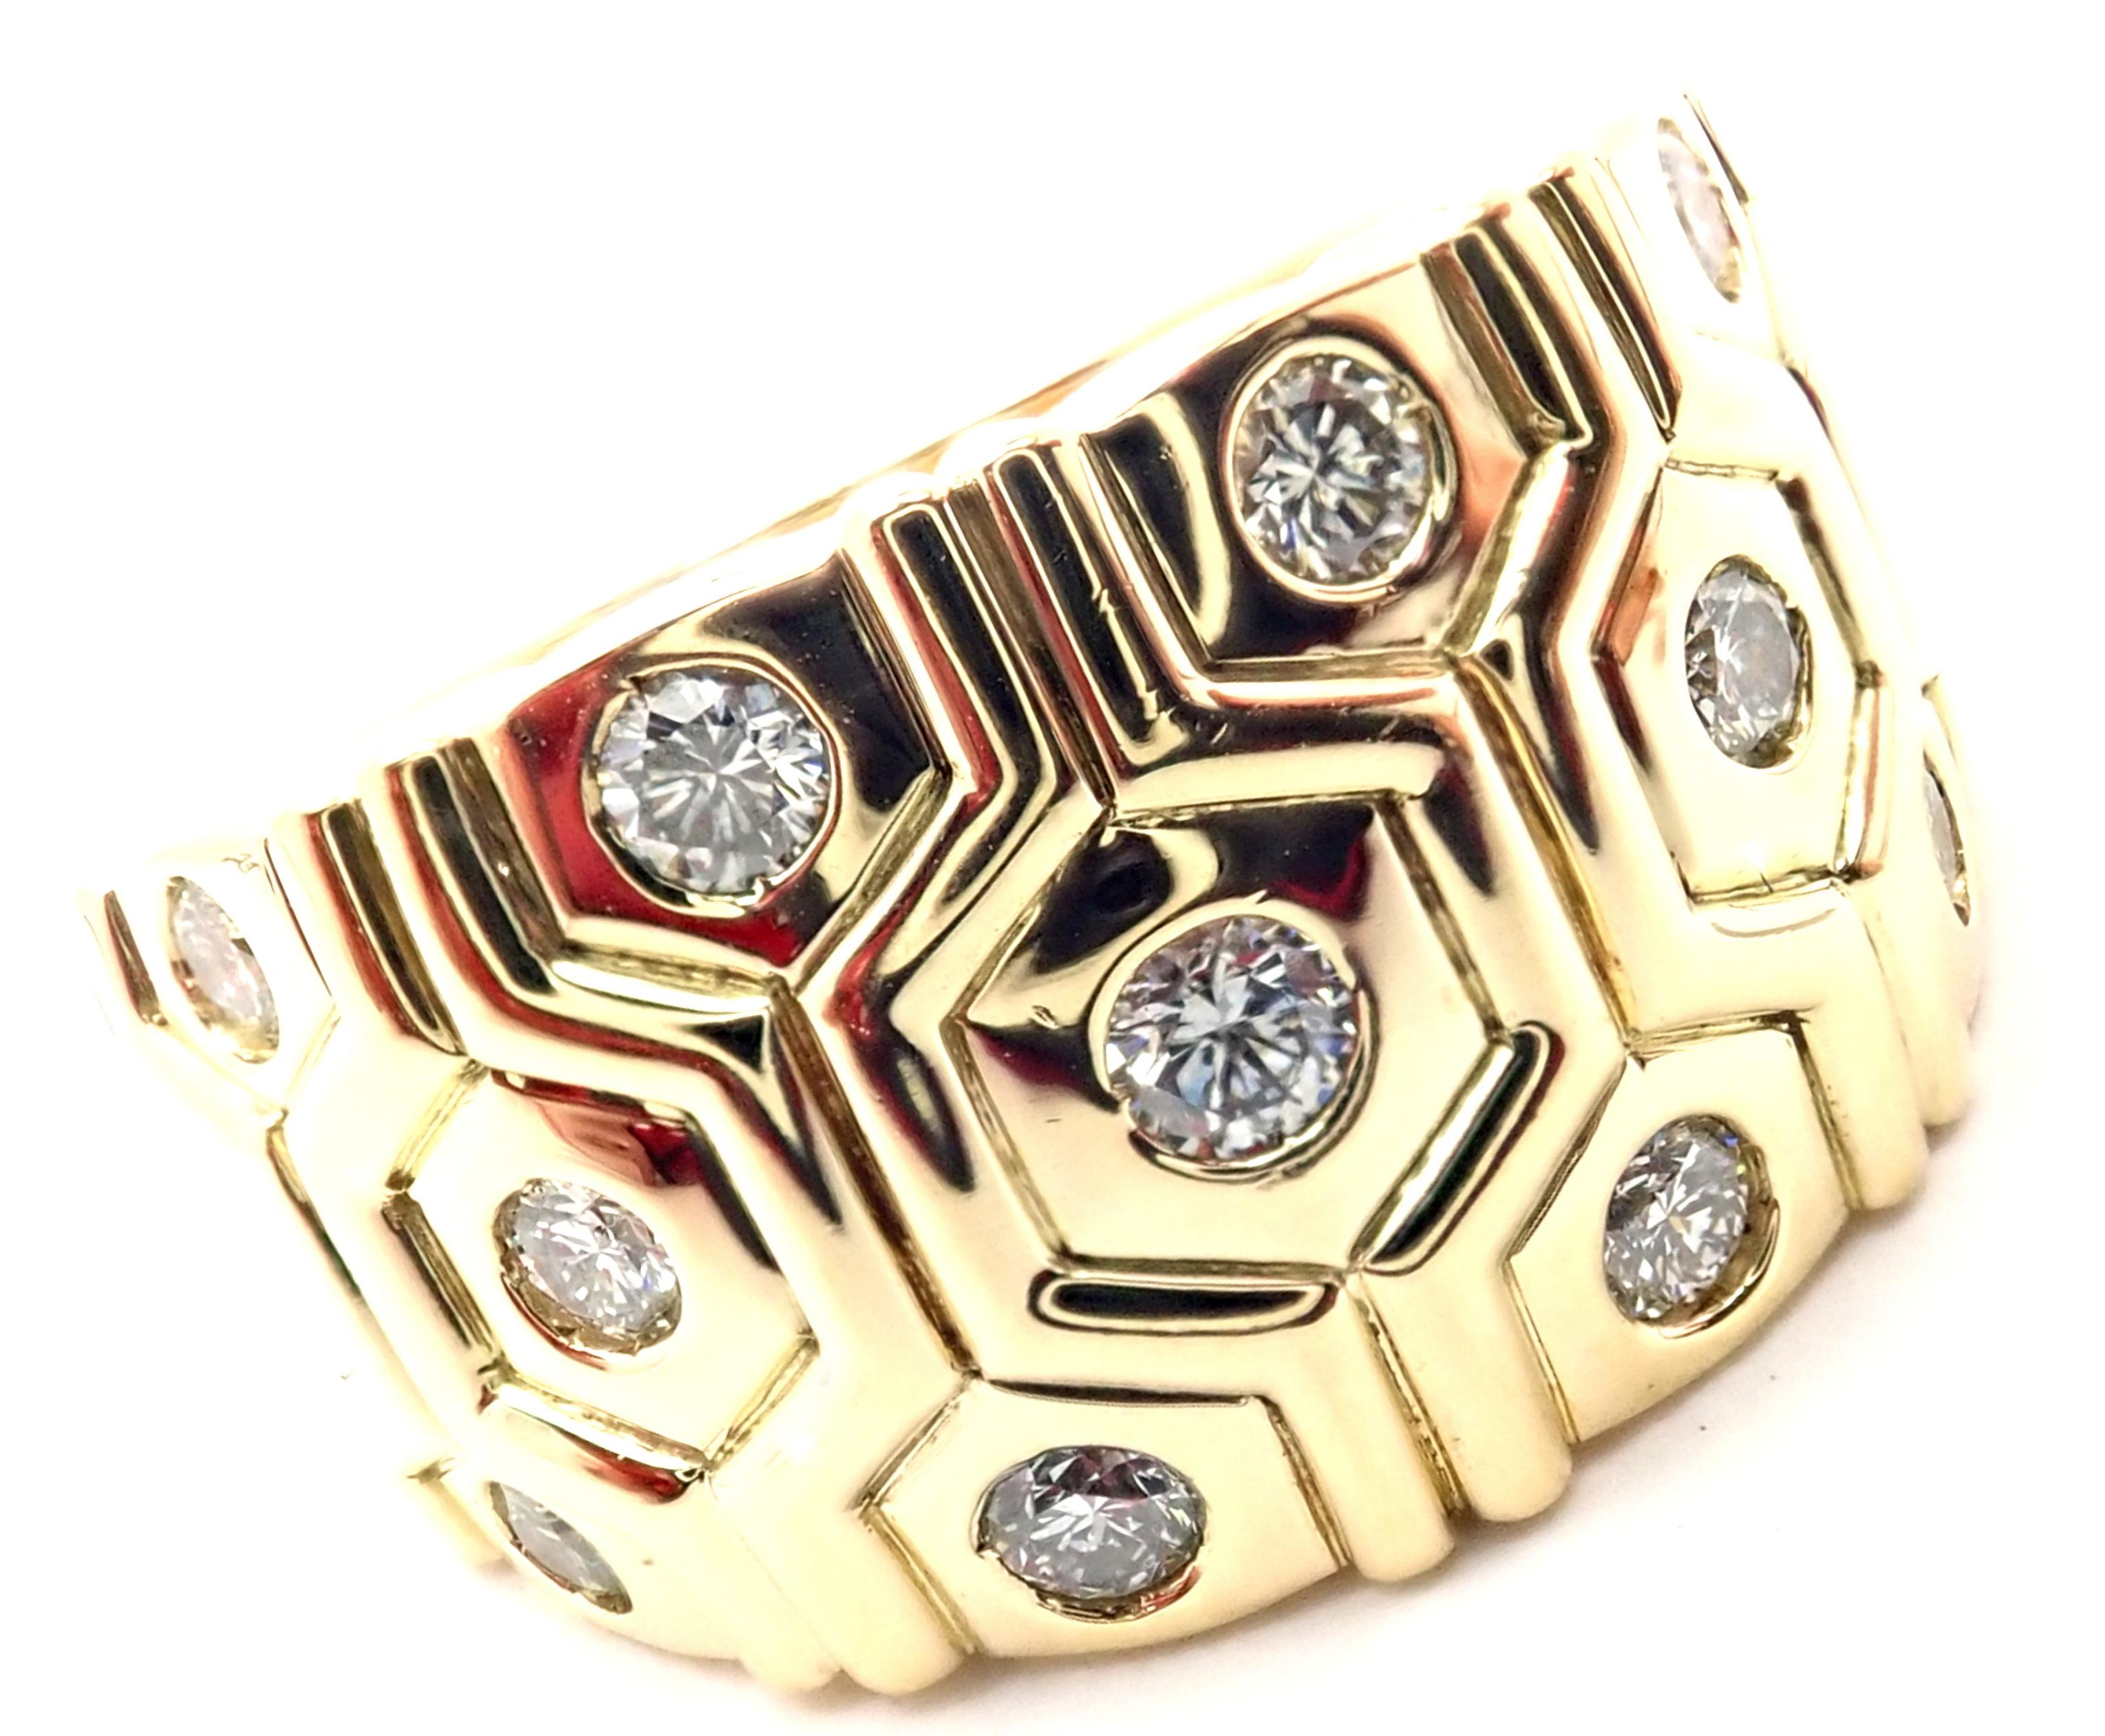 18k Yellow Gold Diamond Wide Beehive Band Ring by Cartier London.
With 11 round brilliant cut diamonds VVS1 clarity, E color total weight approximately .50ct
This ring comes with Cartier box and a Cartier certificate from 1989.
Details: 
Size: